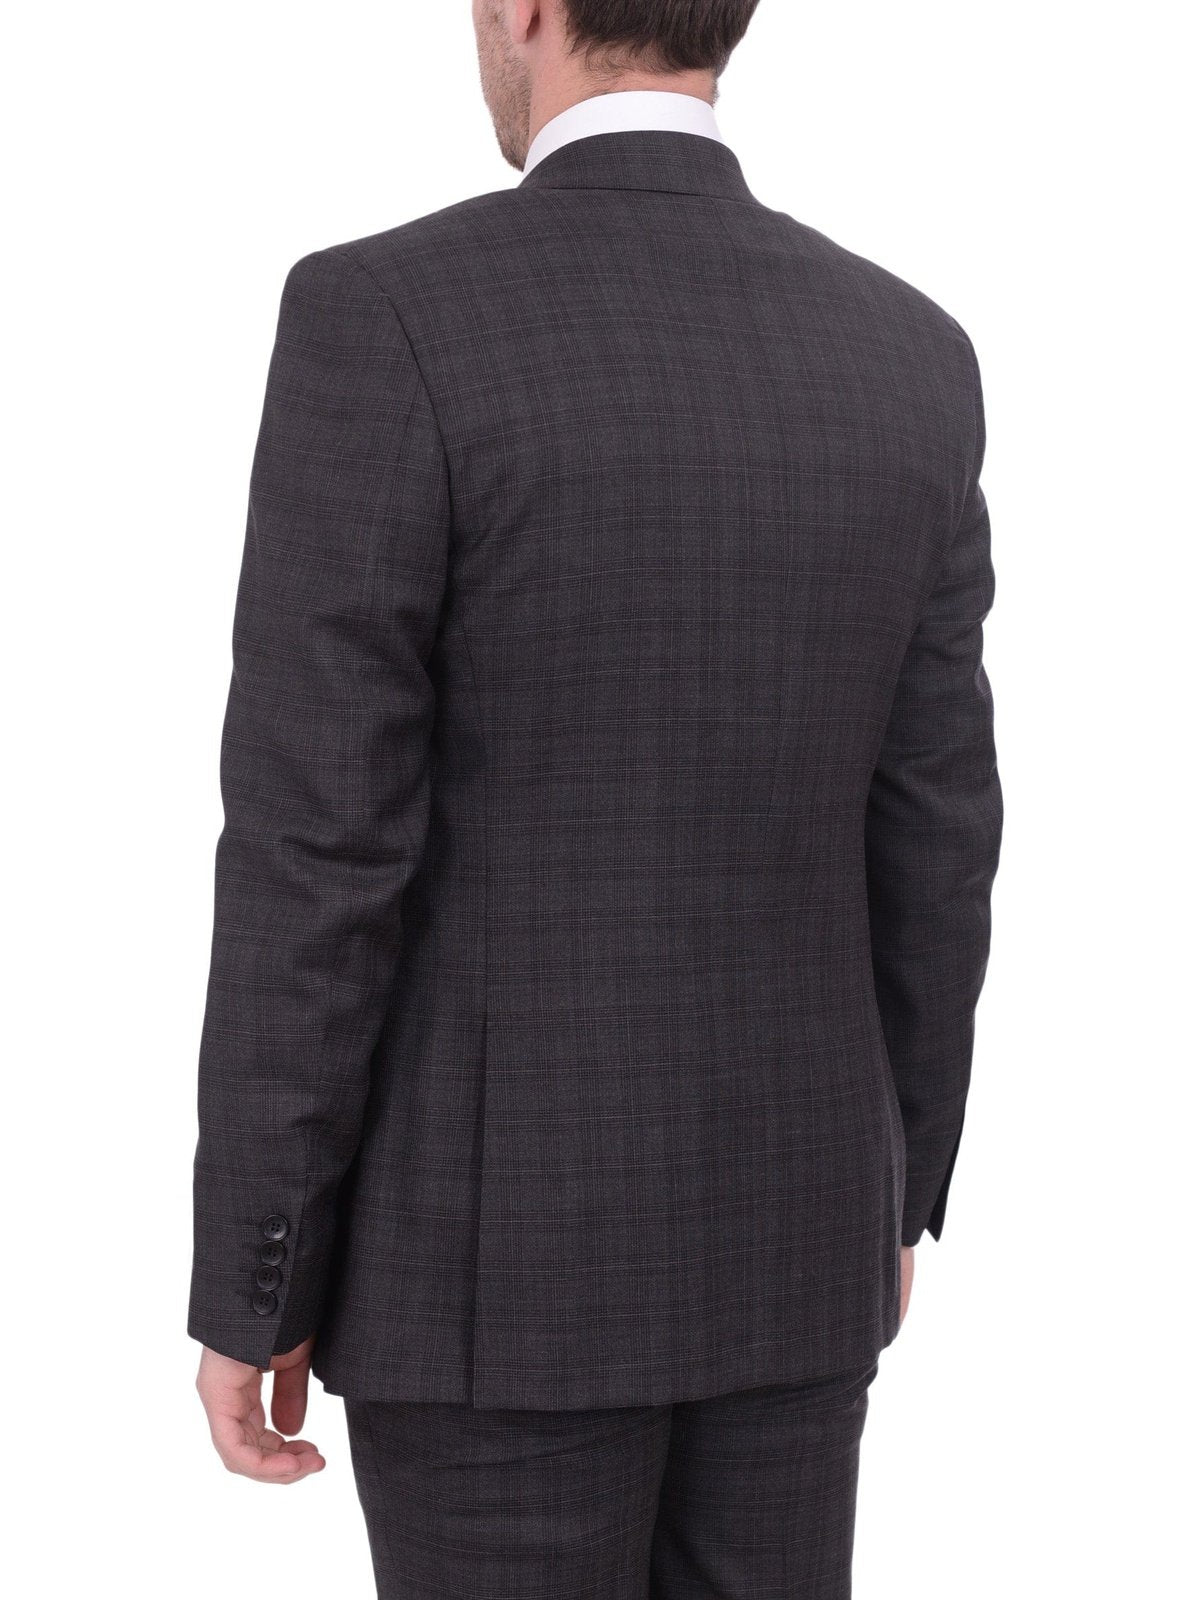 Napoli TWO PIECE SUITS Napoli Slim Fit Charcoal Gray Plaid Half Canvassed Super 150's Wool Suit